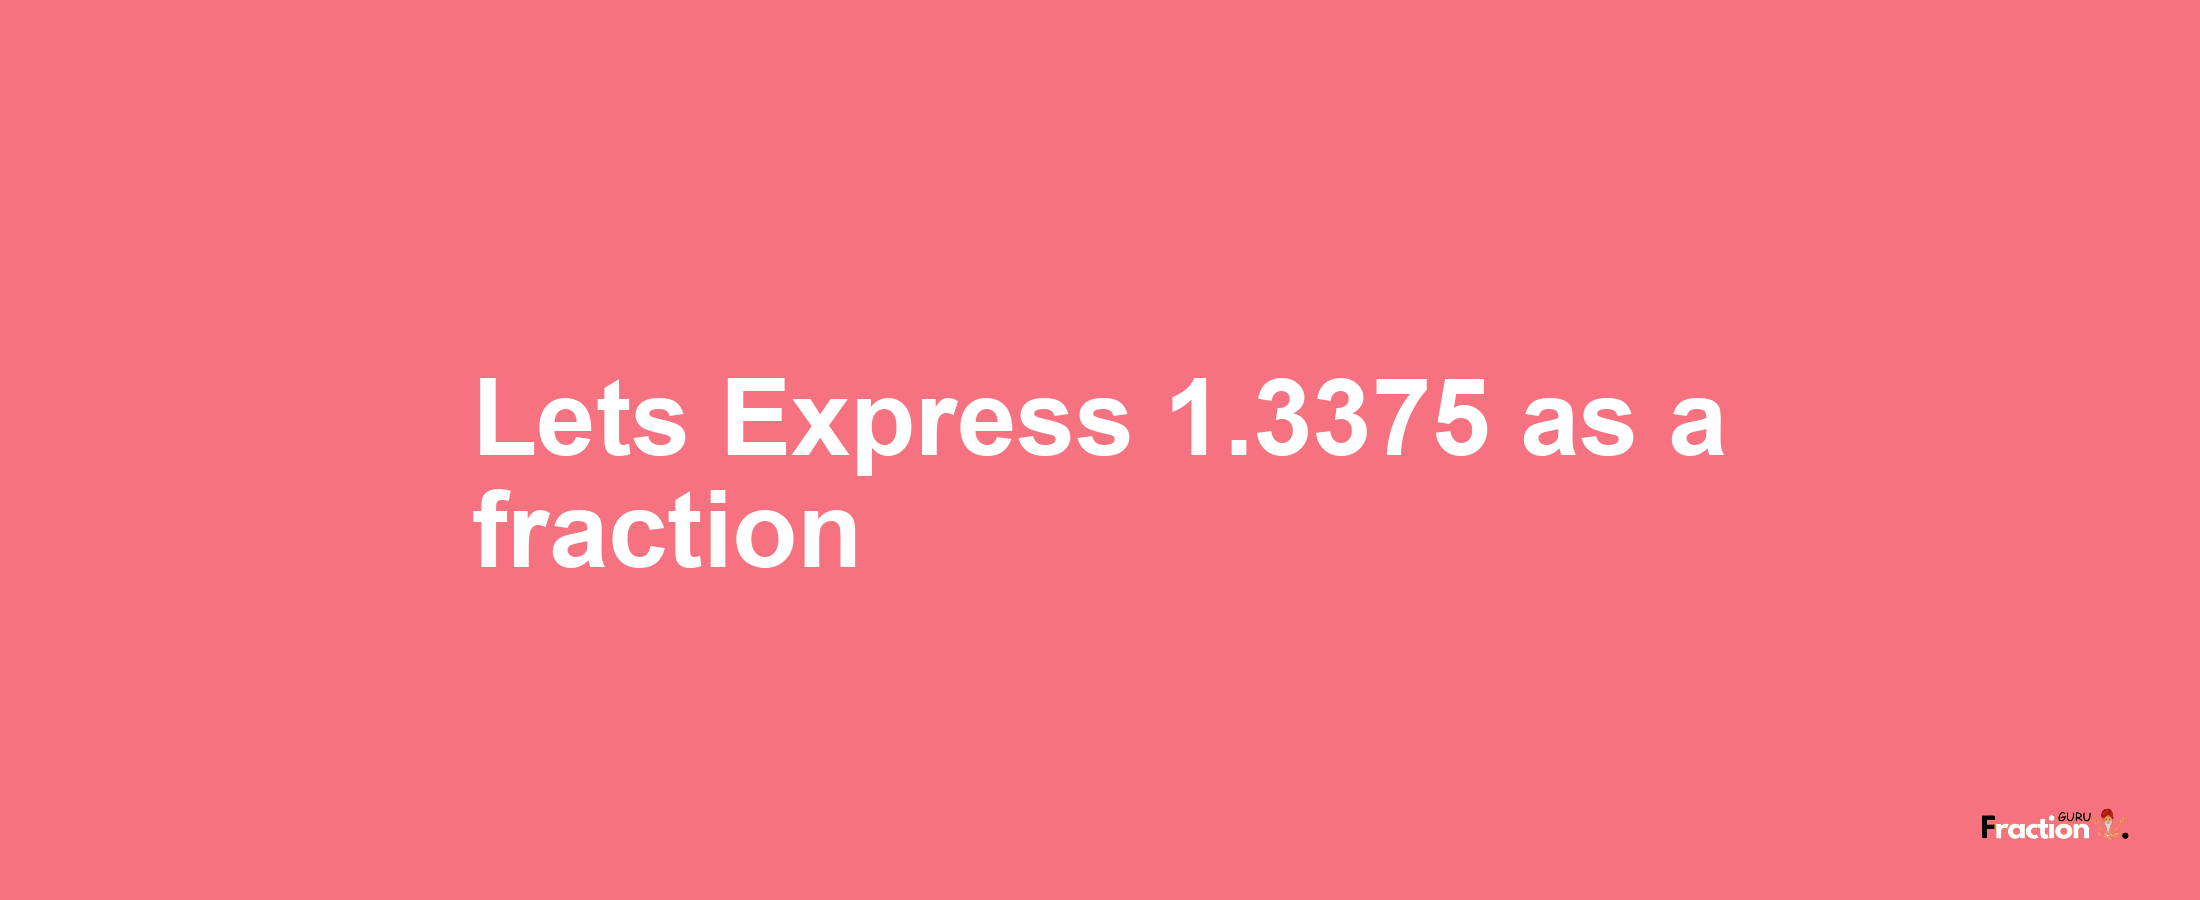 Lets Express 1.3375 as afraction